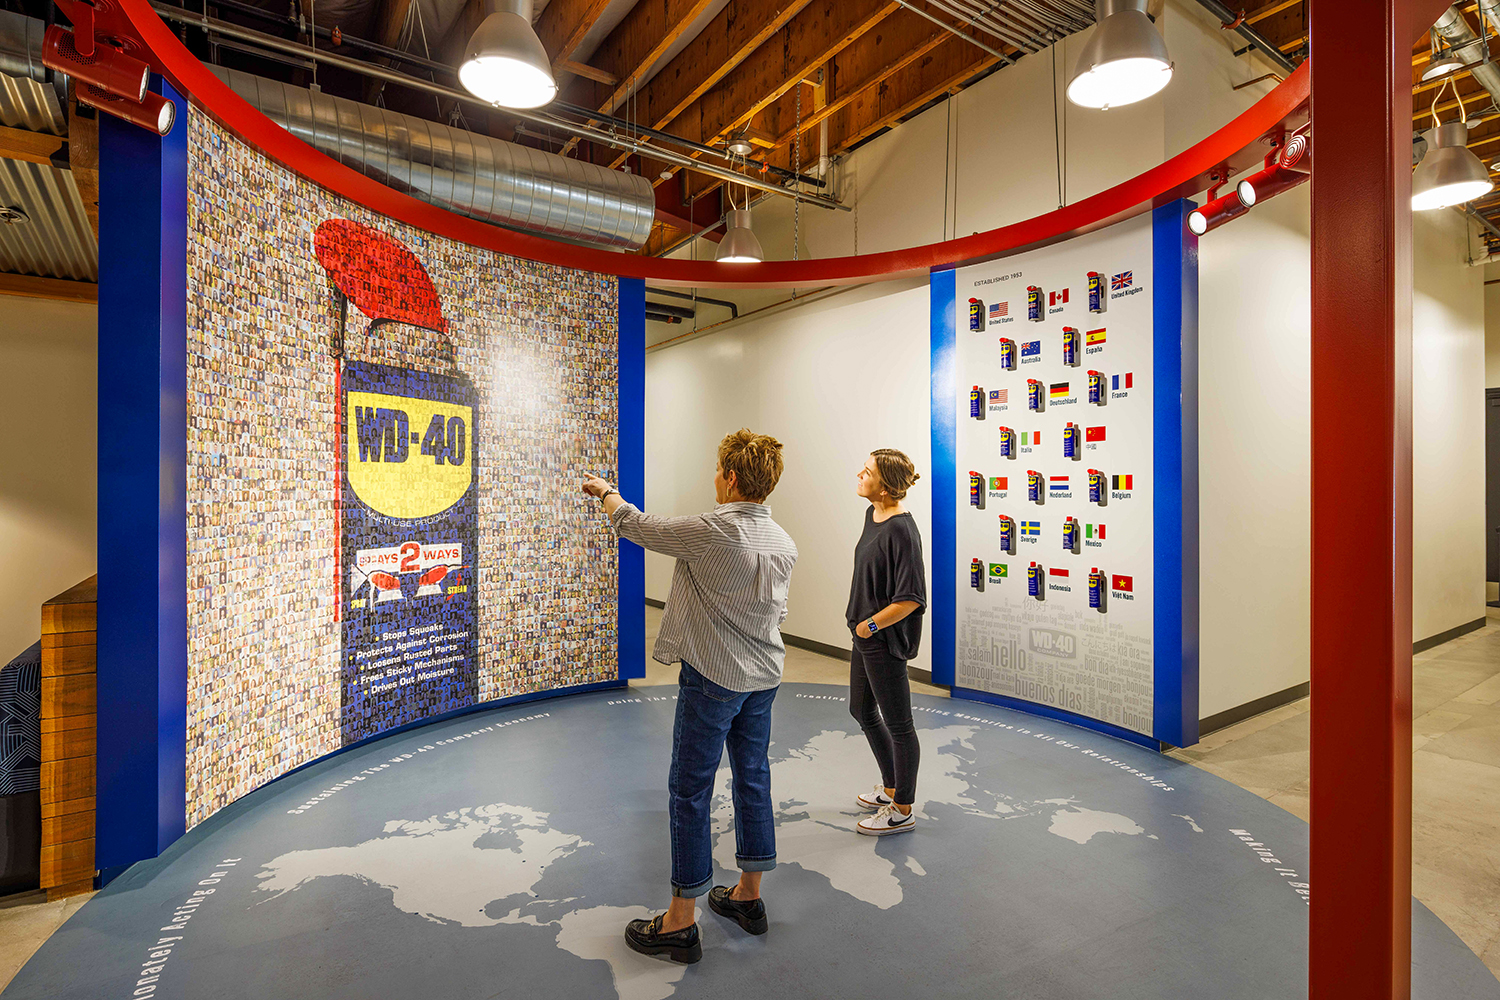 two women are looking at a graphic of a can of WD-40 made from thousands of small pictures of WD-40 employees, while in the background is a display of WD-40 cans from around the world